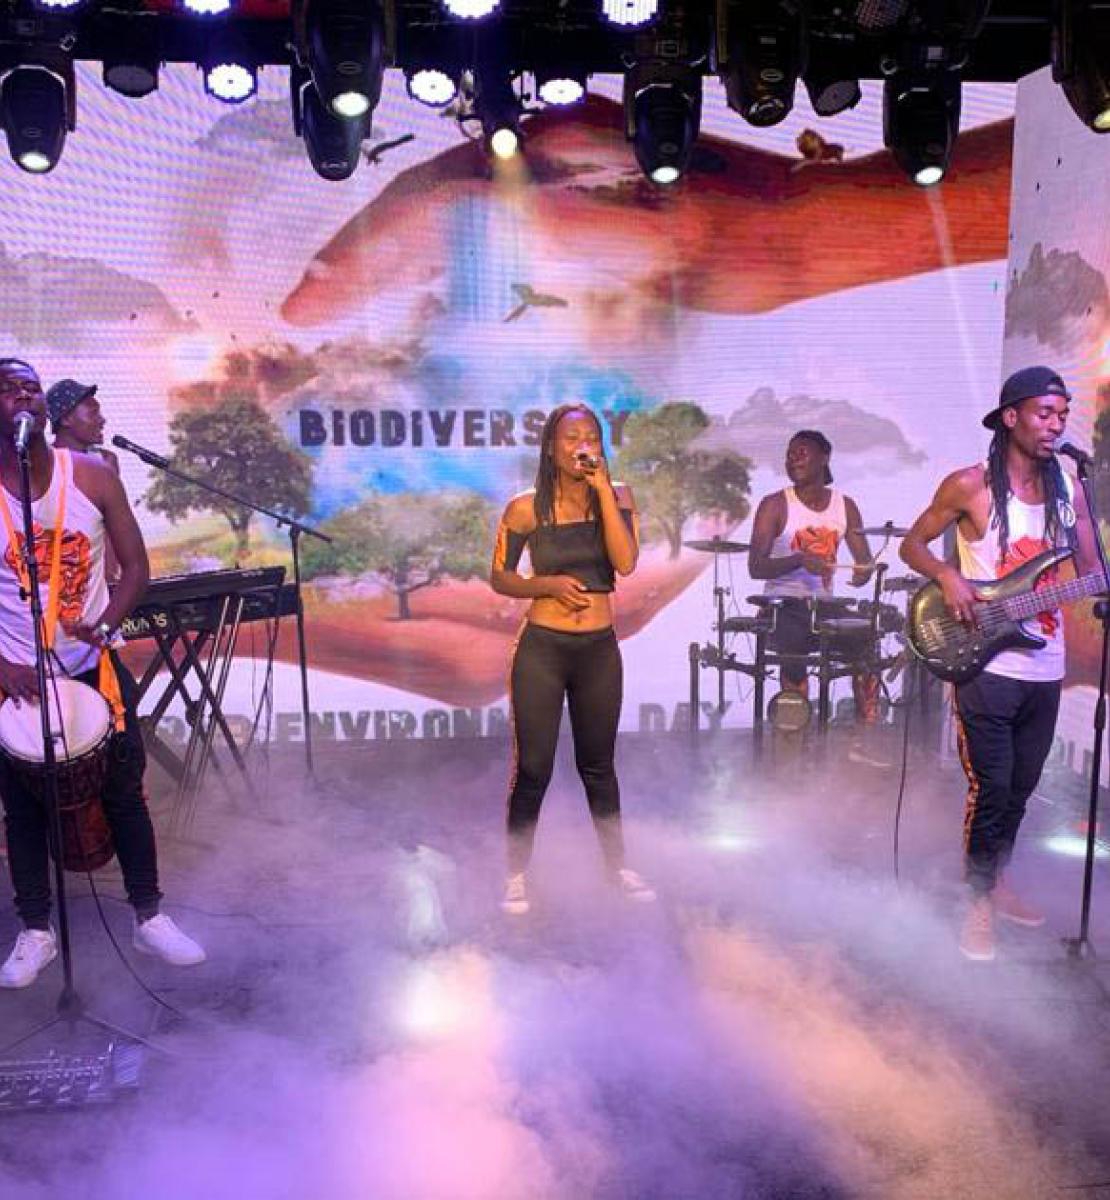 Caroleen Masawi and her band perform surrounded by green screens featuring images of the globe and the term "Biodiversity" featured on them.